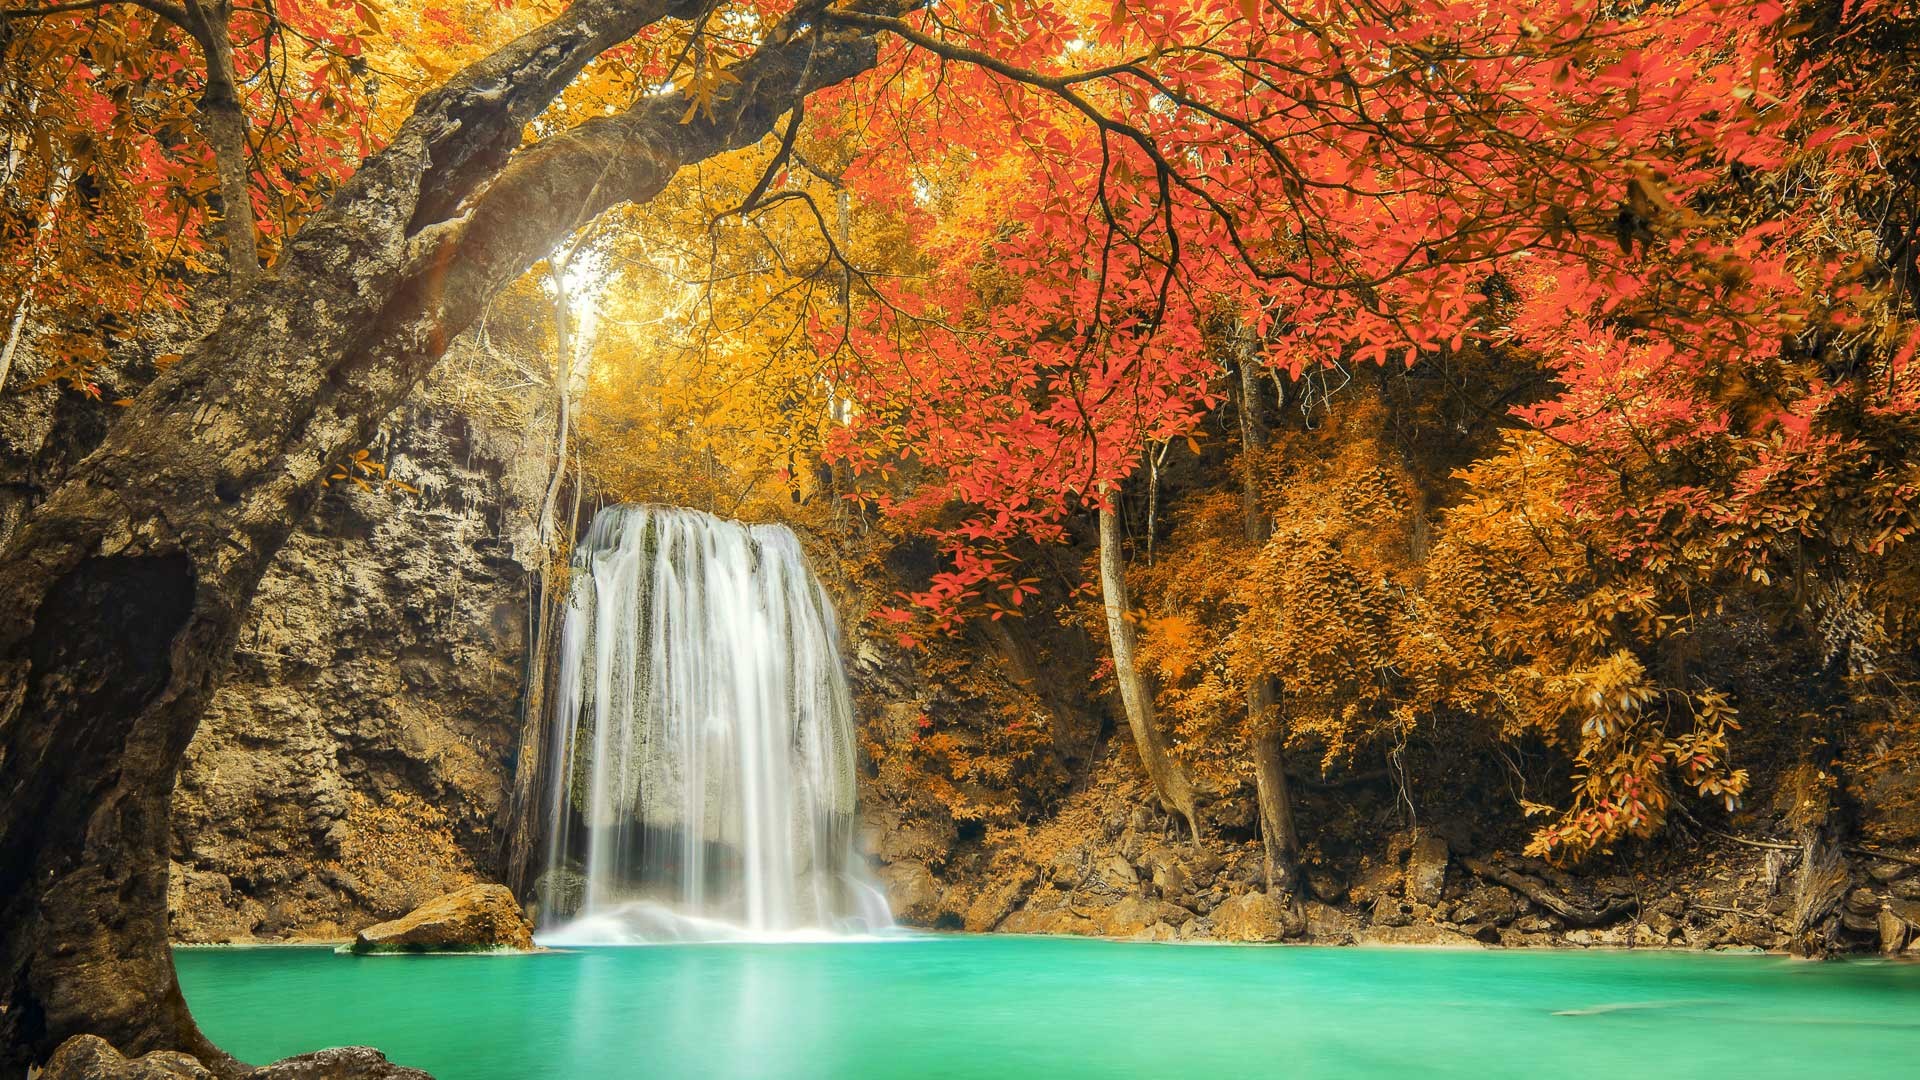 General 1920x1080 nature trees water waterfall fall